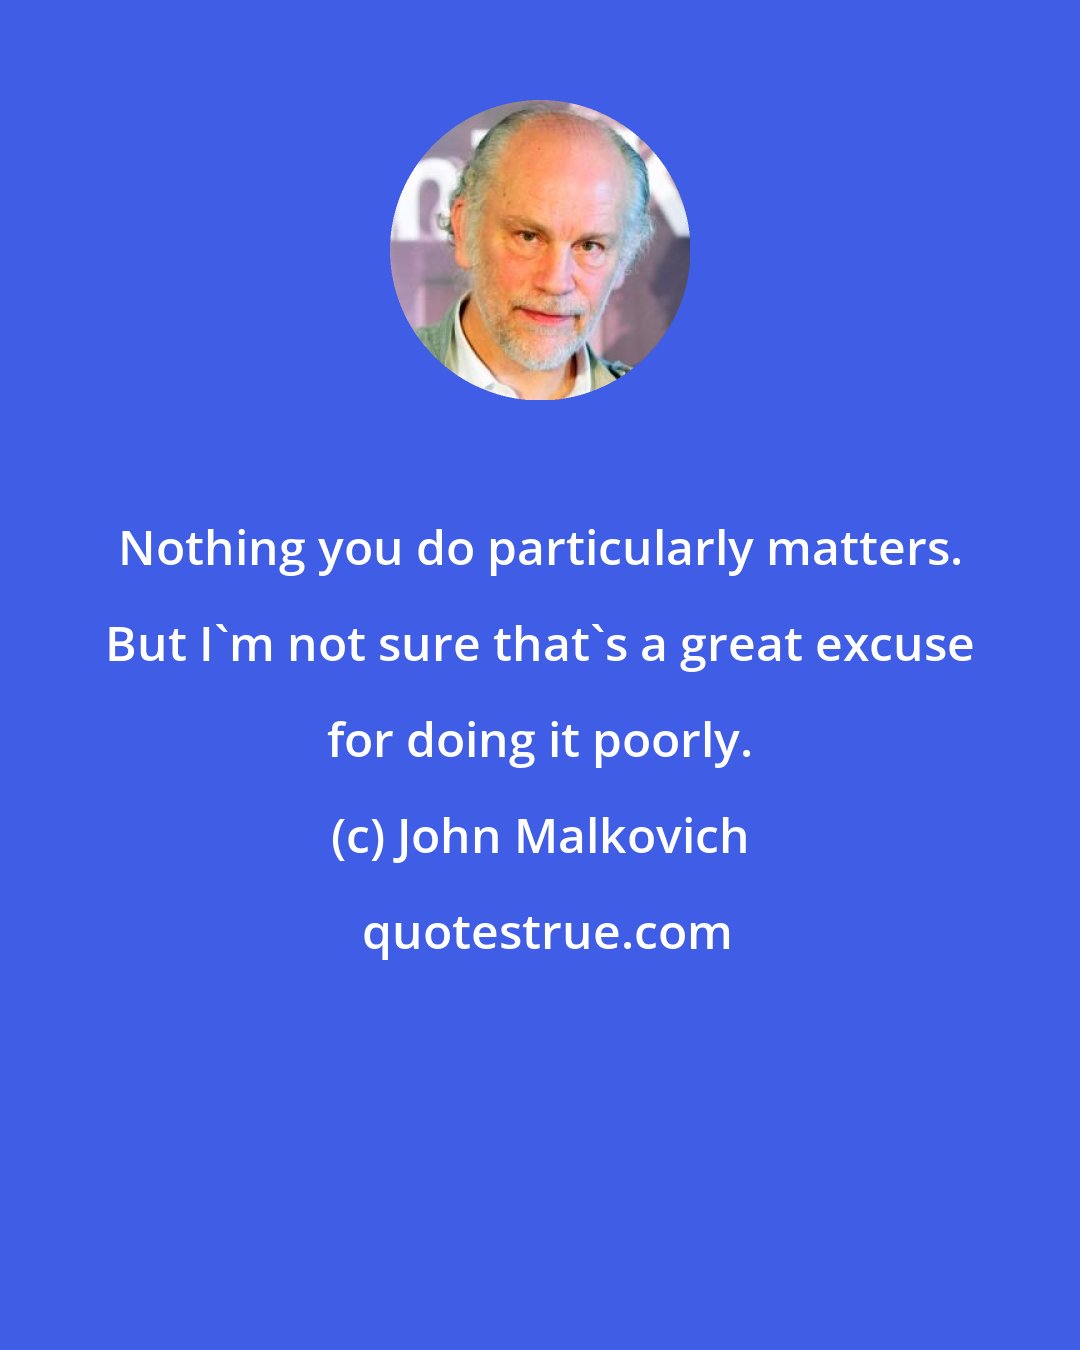 John Malkovich: Nothing you do particularly matters. But I'm not sure that's a great excuse for doing it poorly.